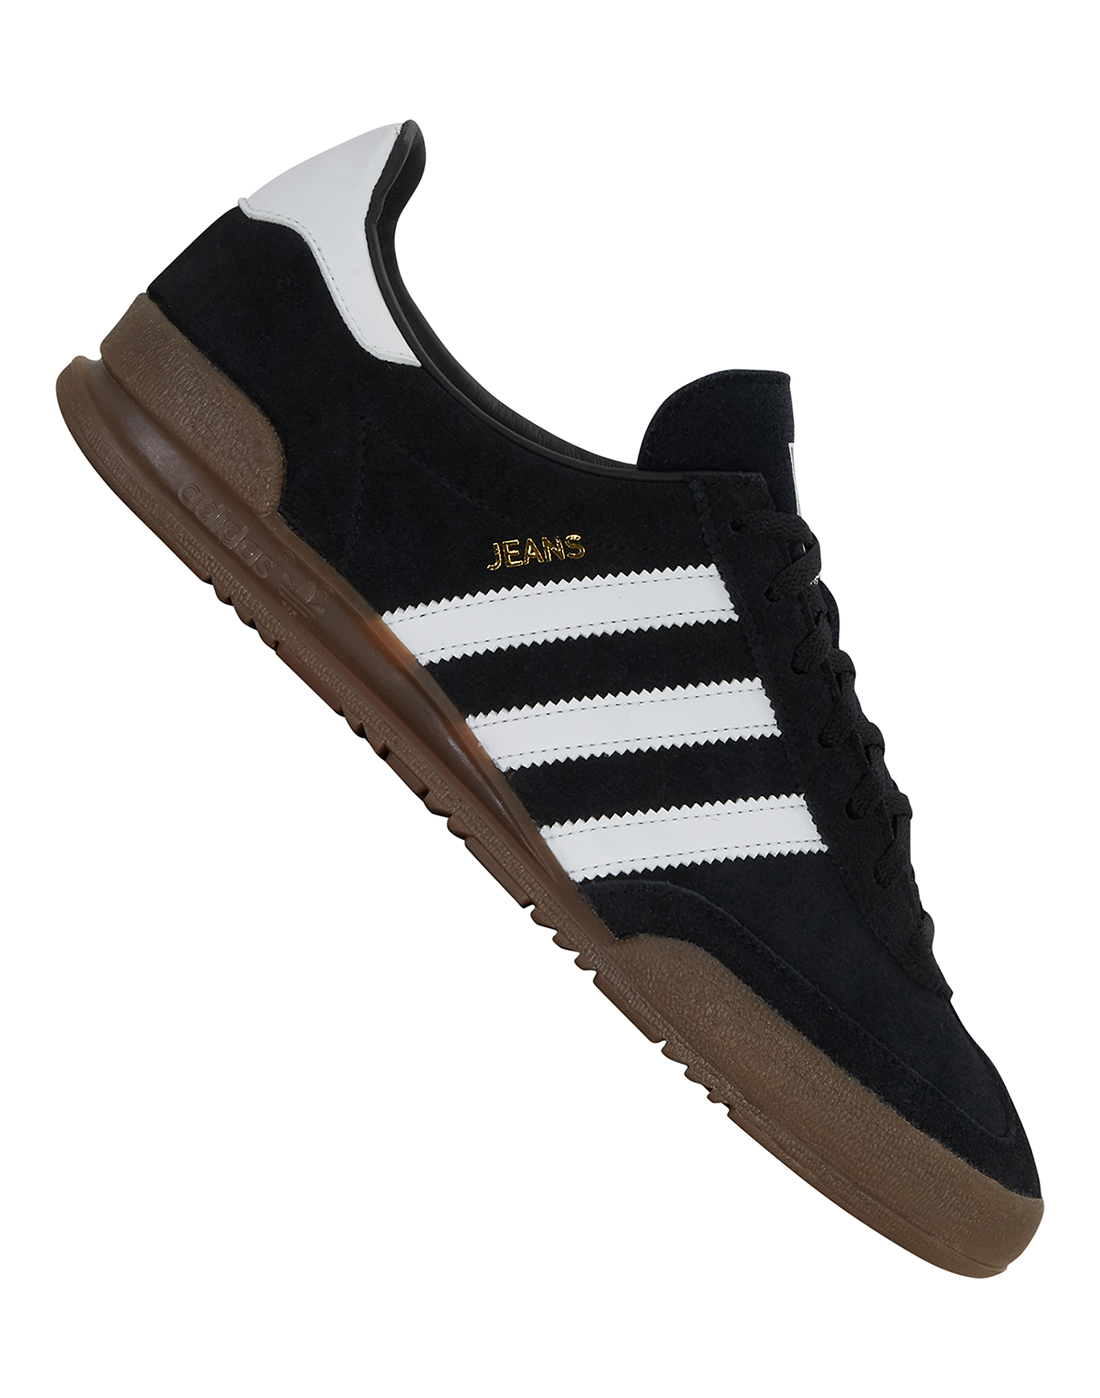 New Adidas Jeans Trainers | museosdelima.com